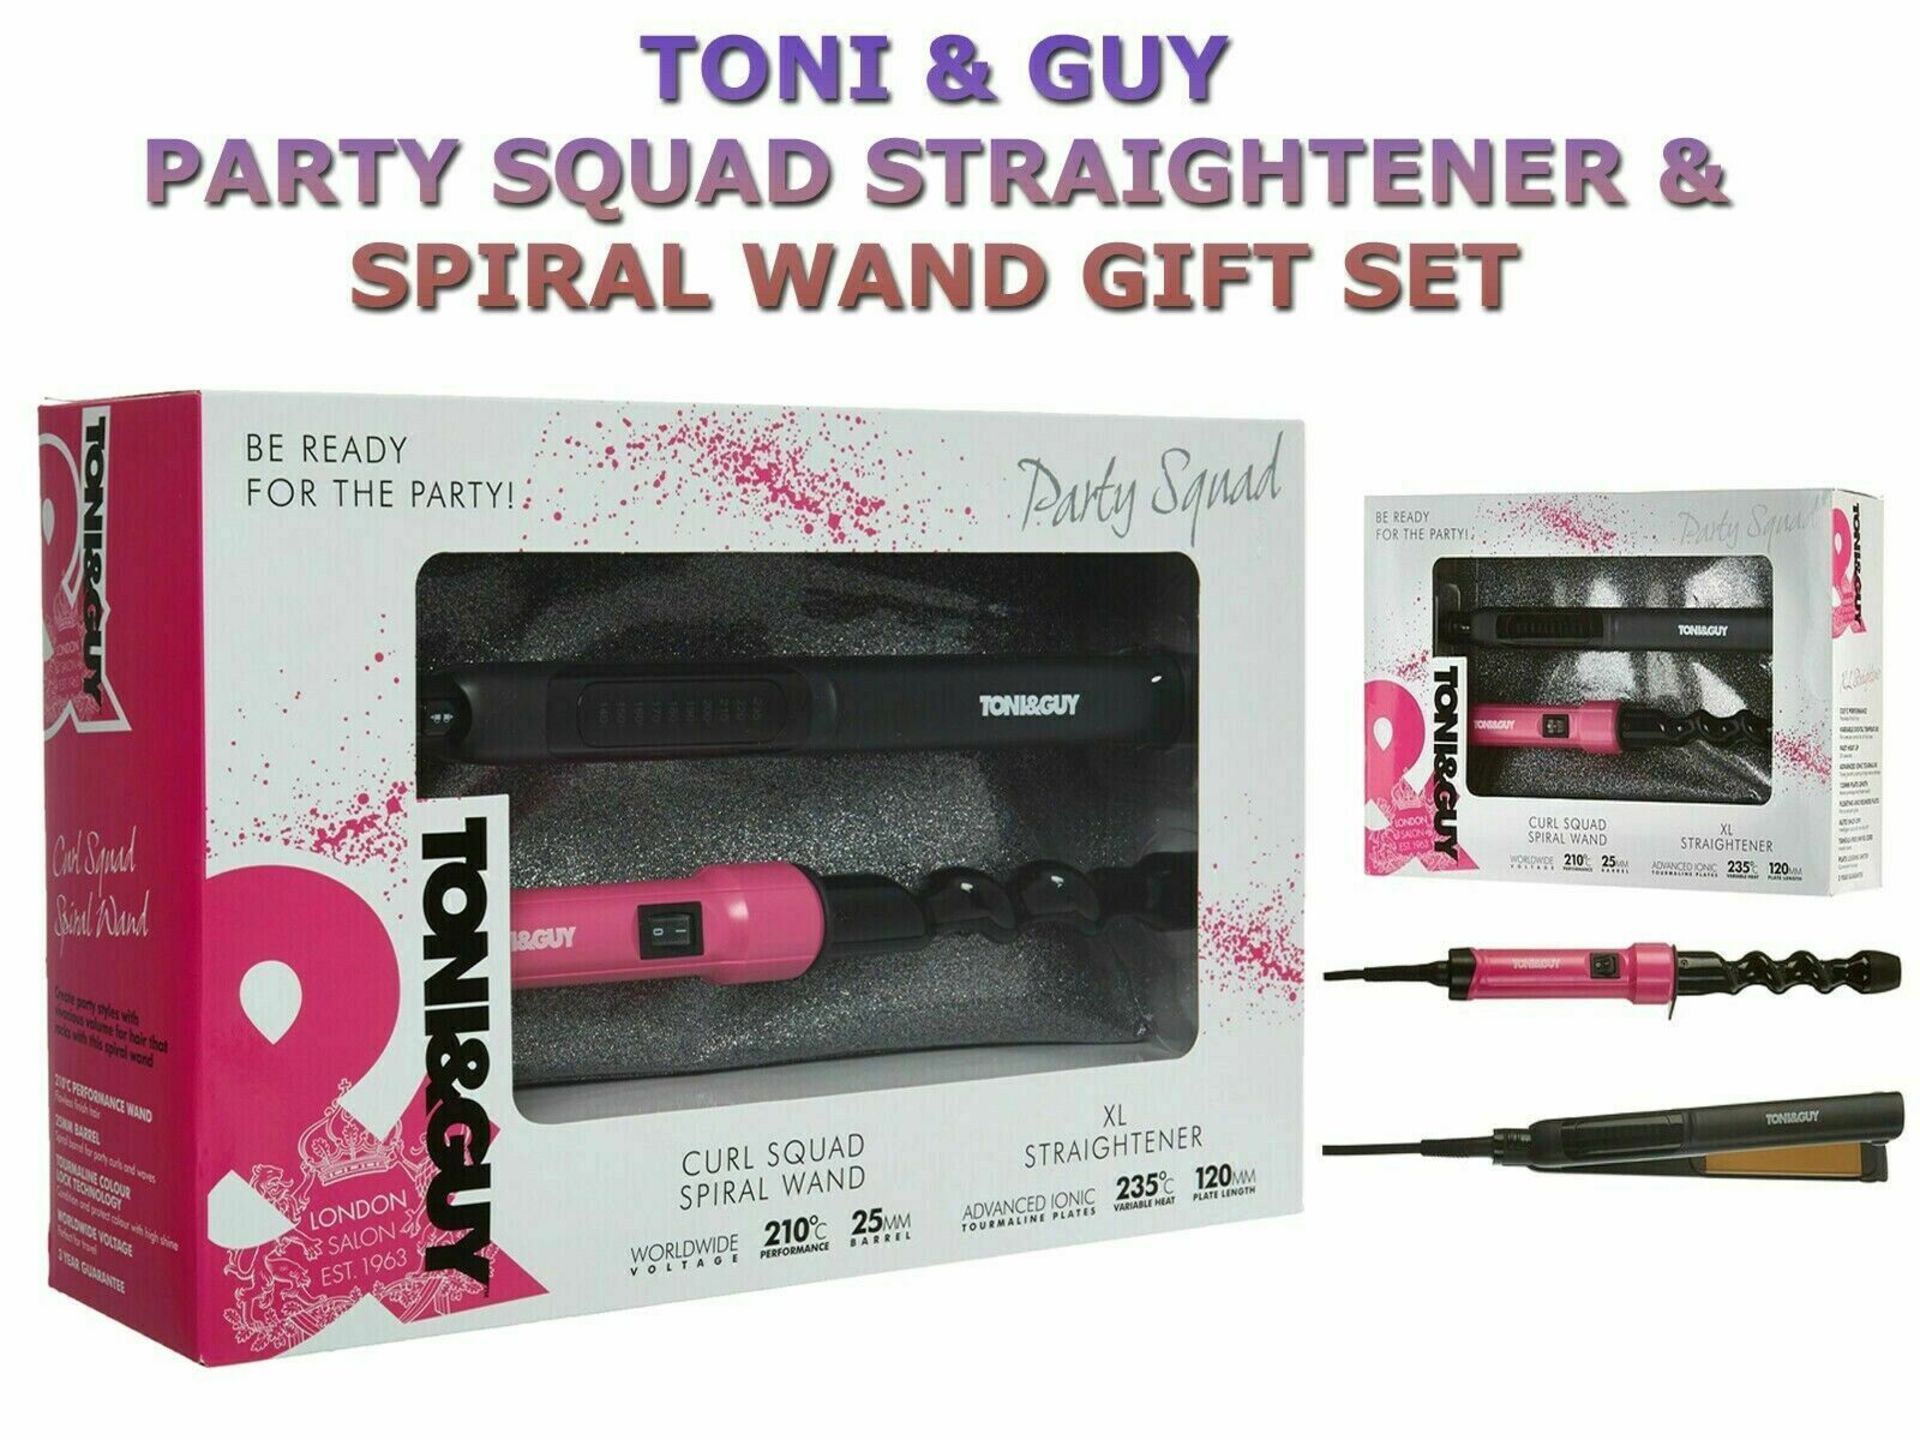 new toni & guy party squad straightener & spiral wand gift set christmas gift rrp£130 - Image 2 of 2